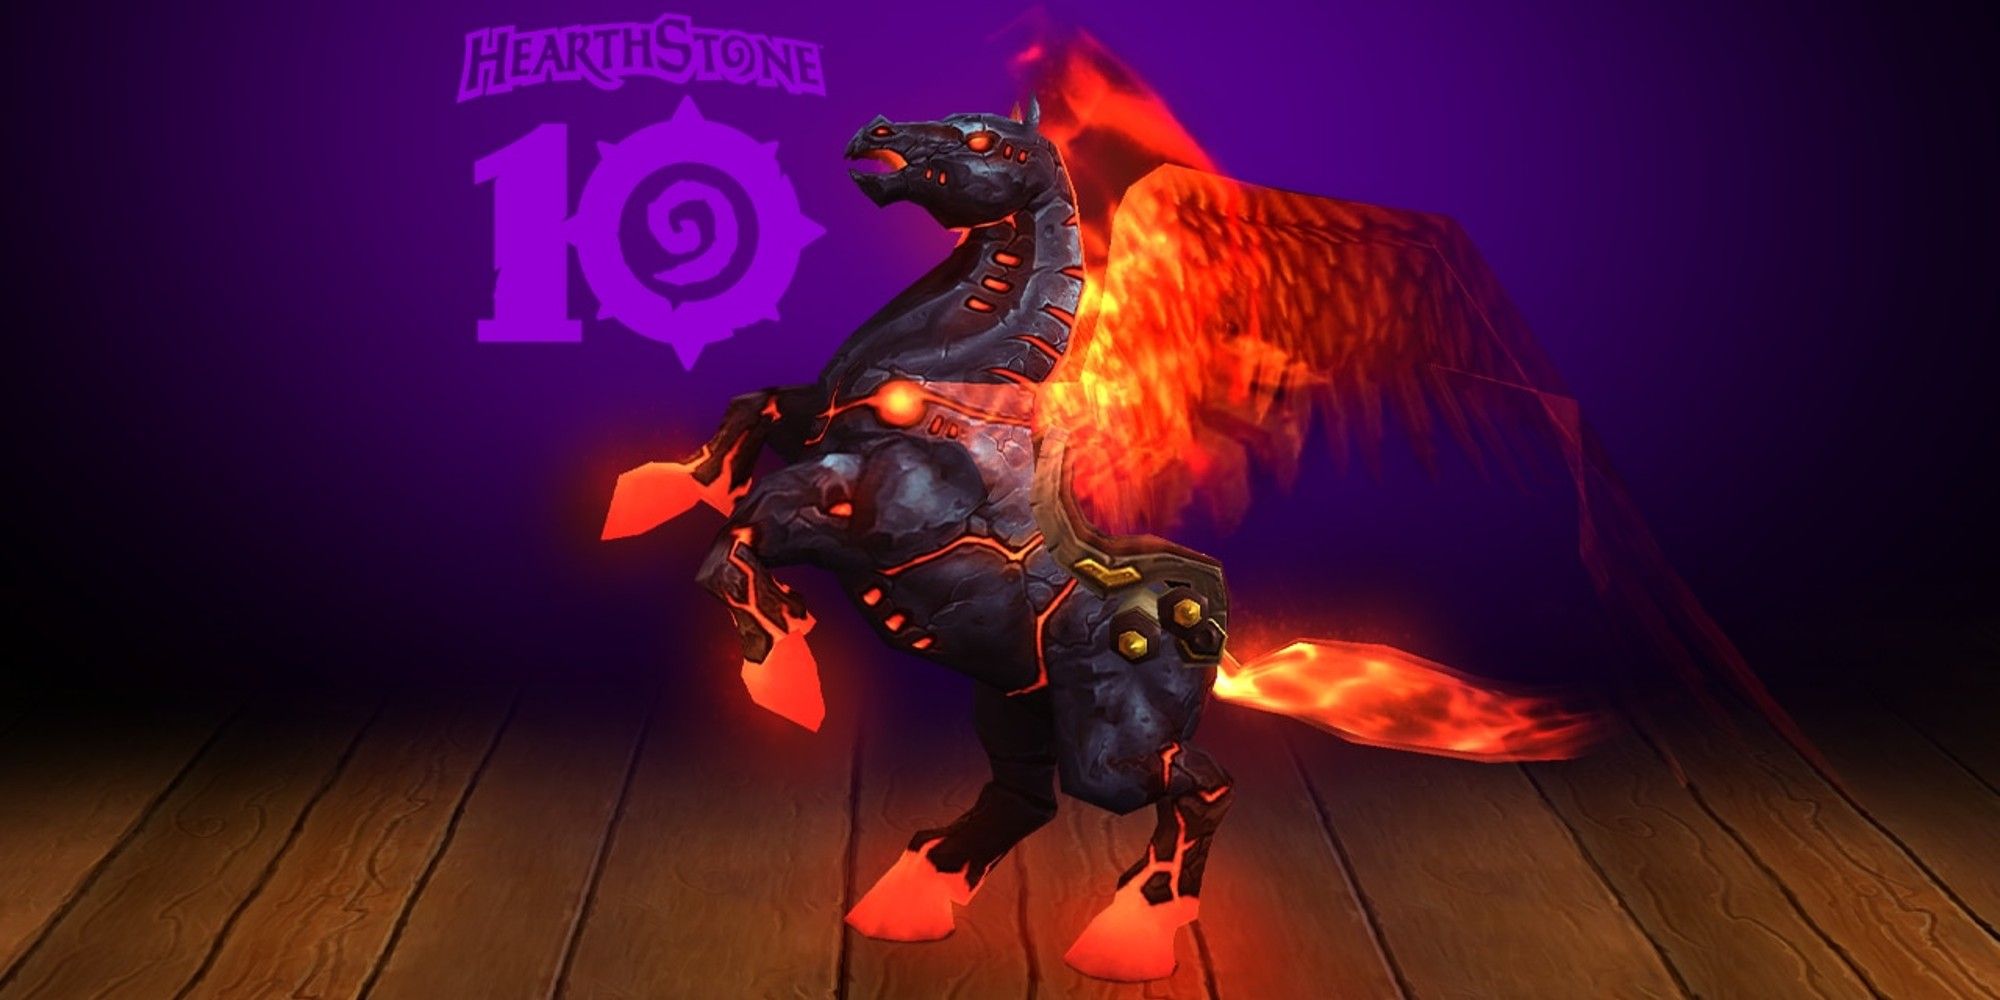 The Fiery Hearthsteed rearing on its hindlegs with the Hearthsone 10 logo in the background for World of Warcraft.